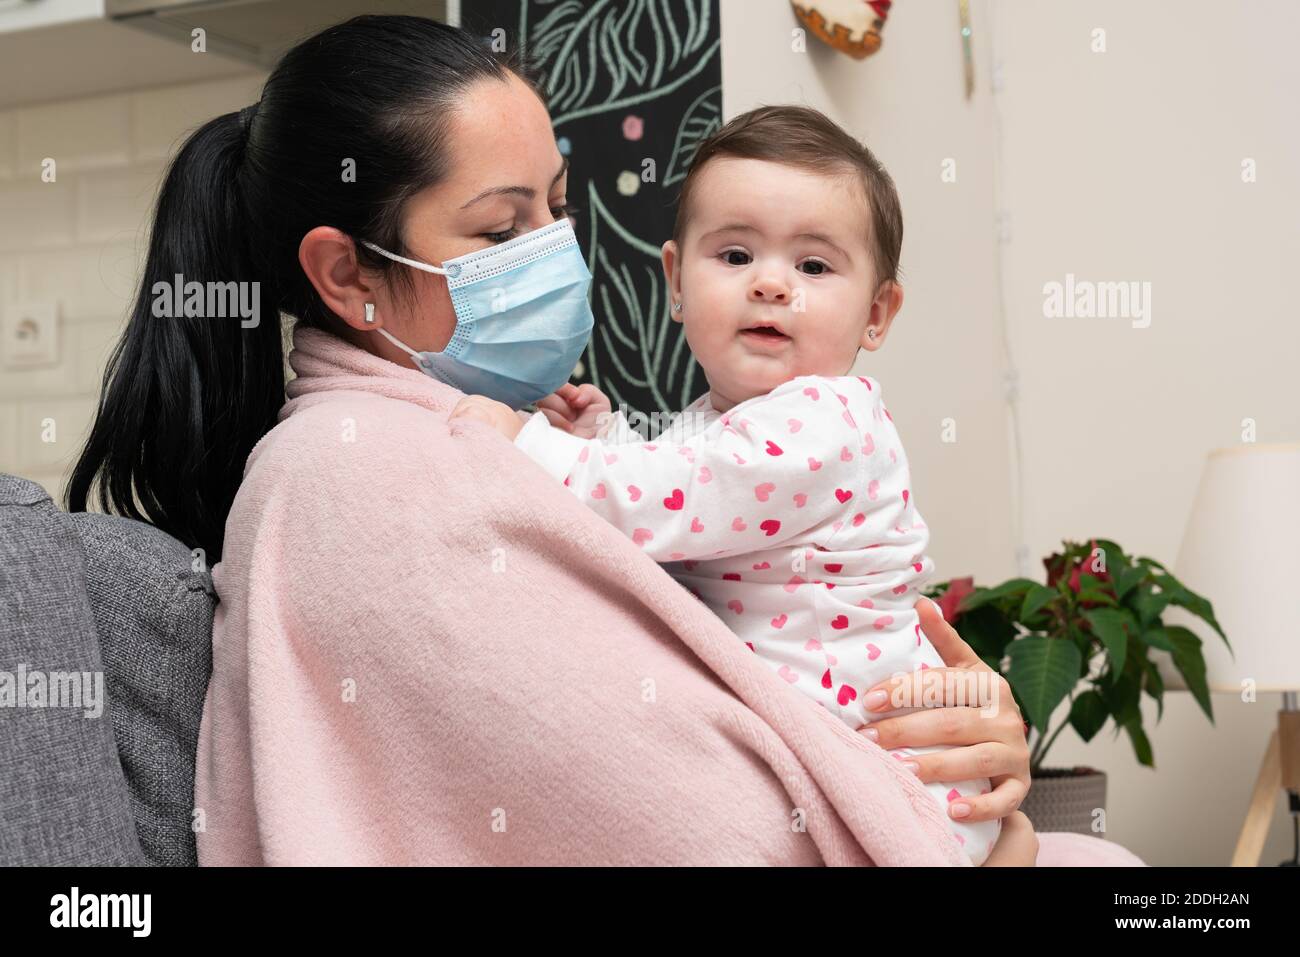 Ill female adult model wearing surgical or medical covid19 cold flu protective mask hugging cute baby child as pandemic family time concept Stock Photo